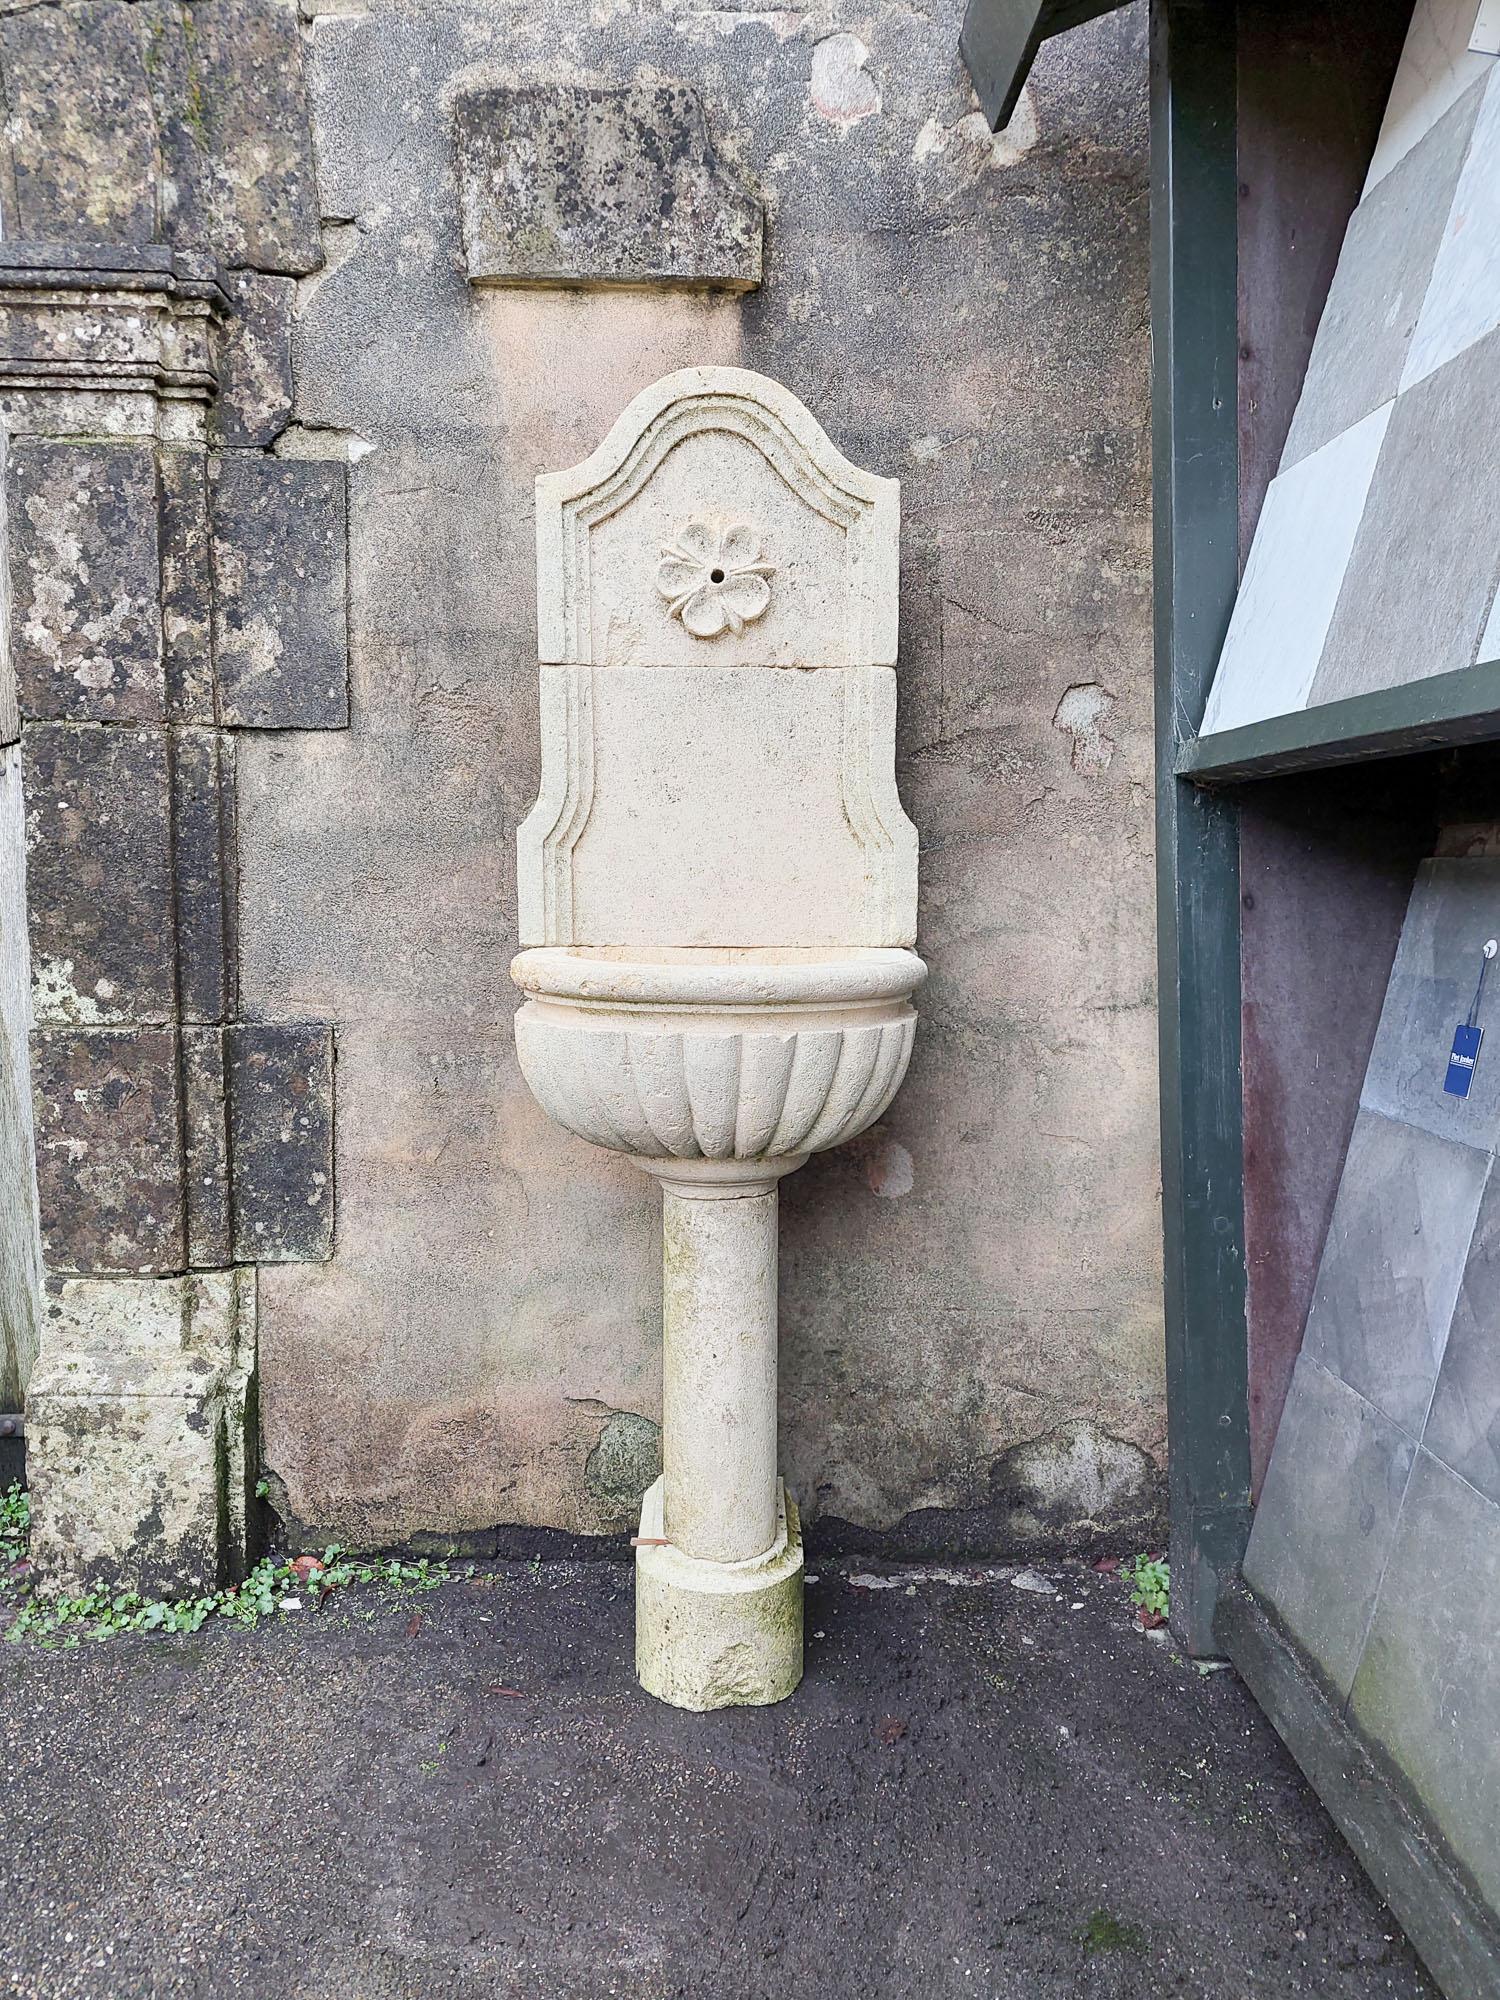 French wall fountain made of light limestone, the bowl with a lobed edge and a flower / rosette around the tap hole.

h 156 x w 49 x d 50 cm